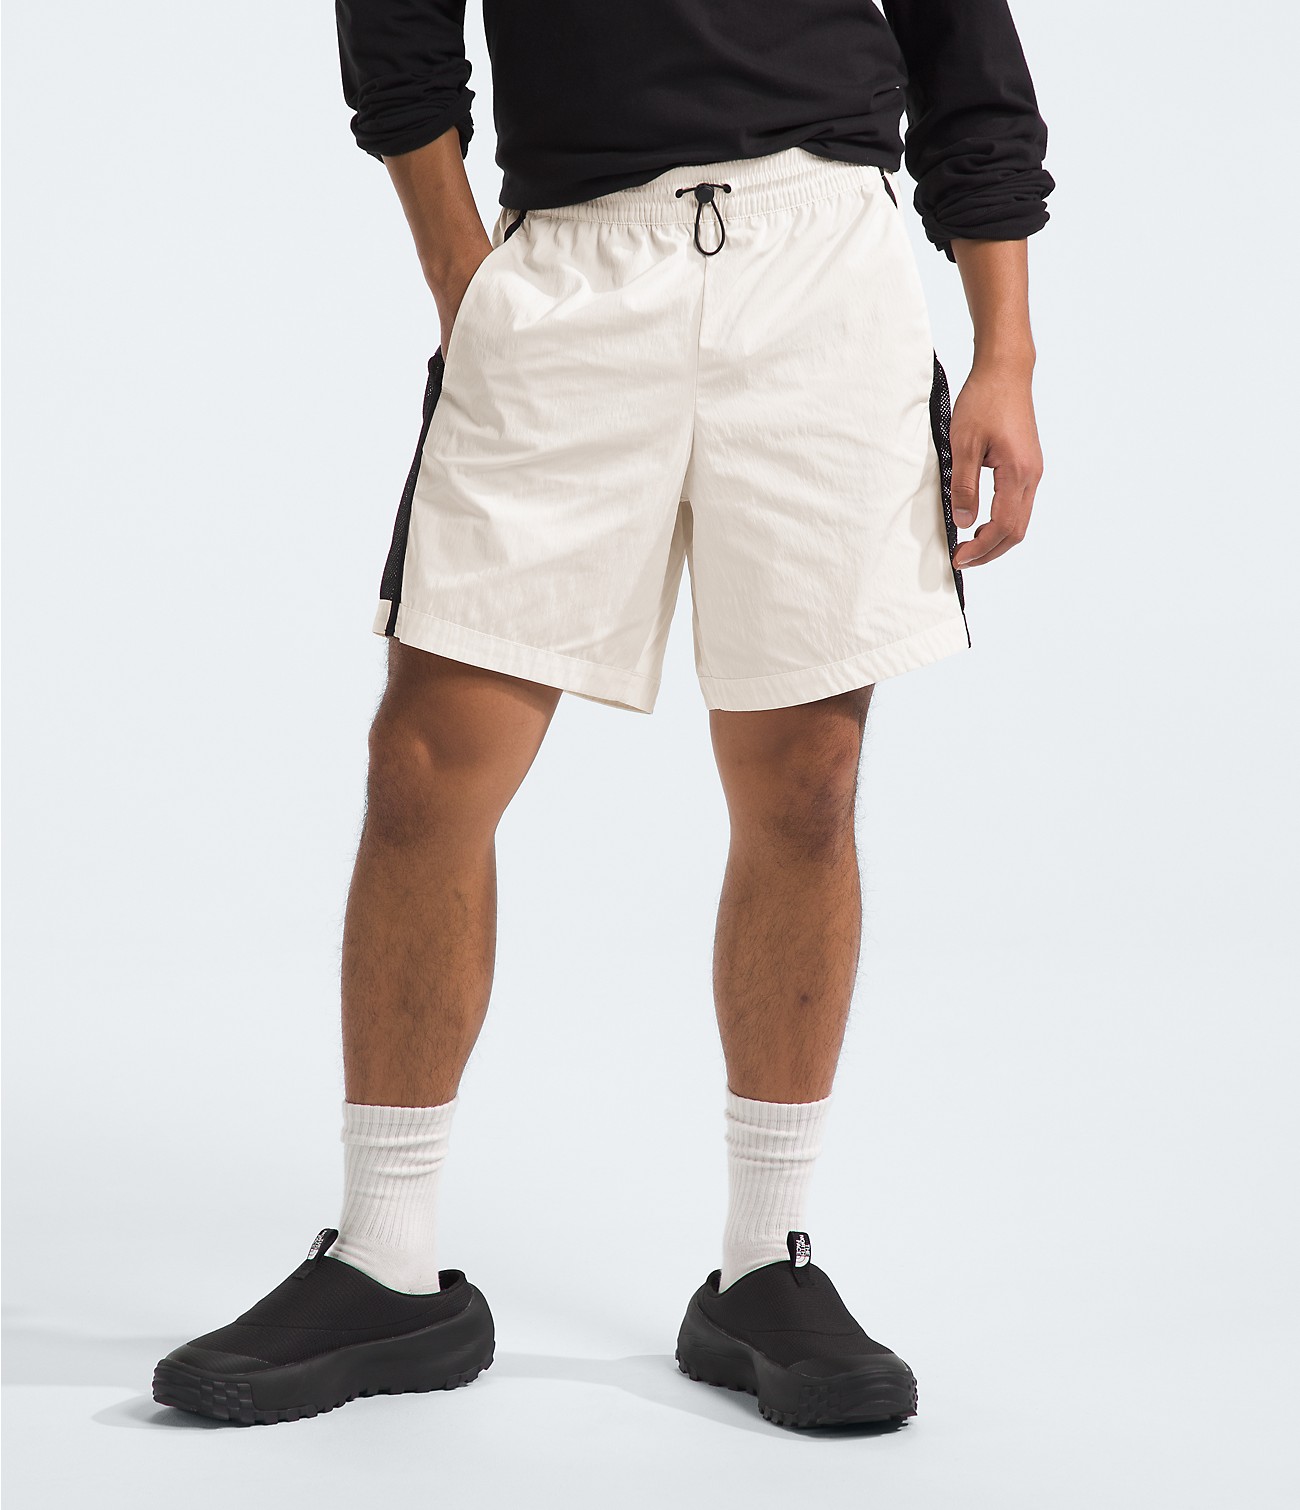 Men’s 2000 Mountain Light Wind Shorts | The North Face